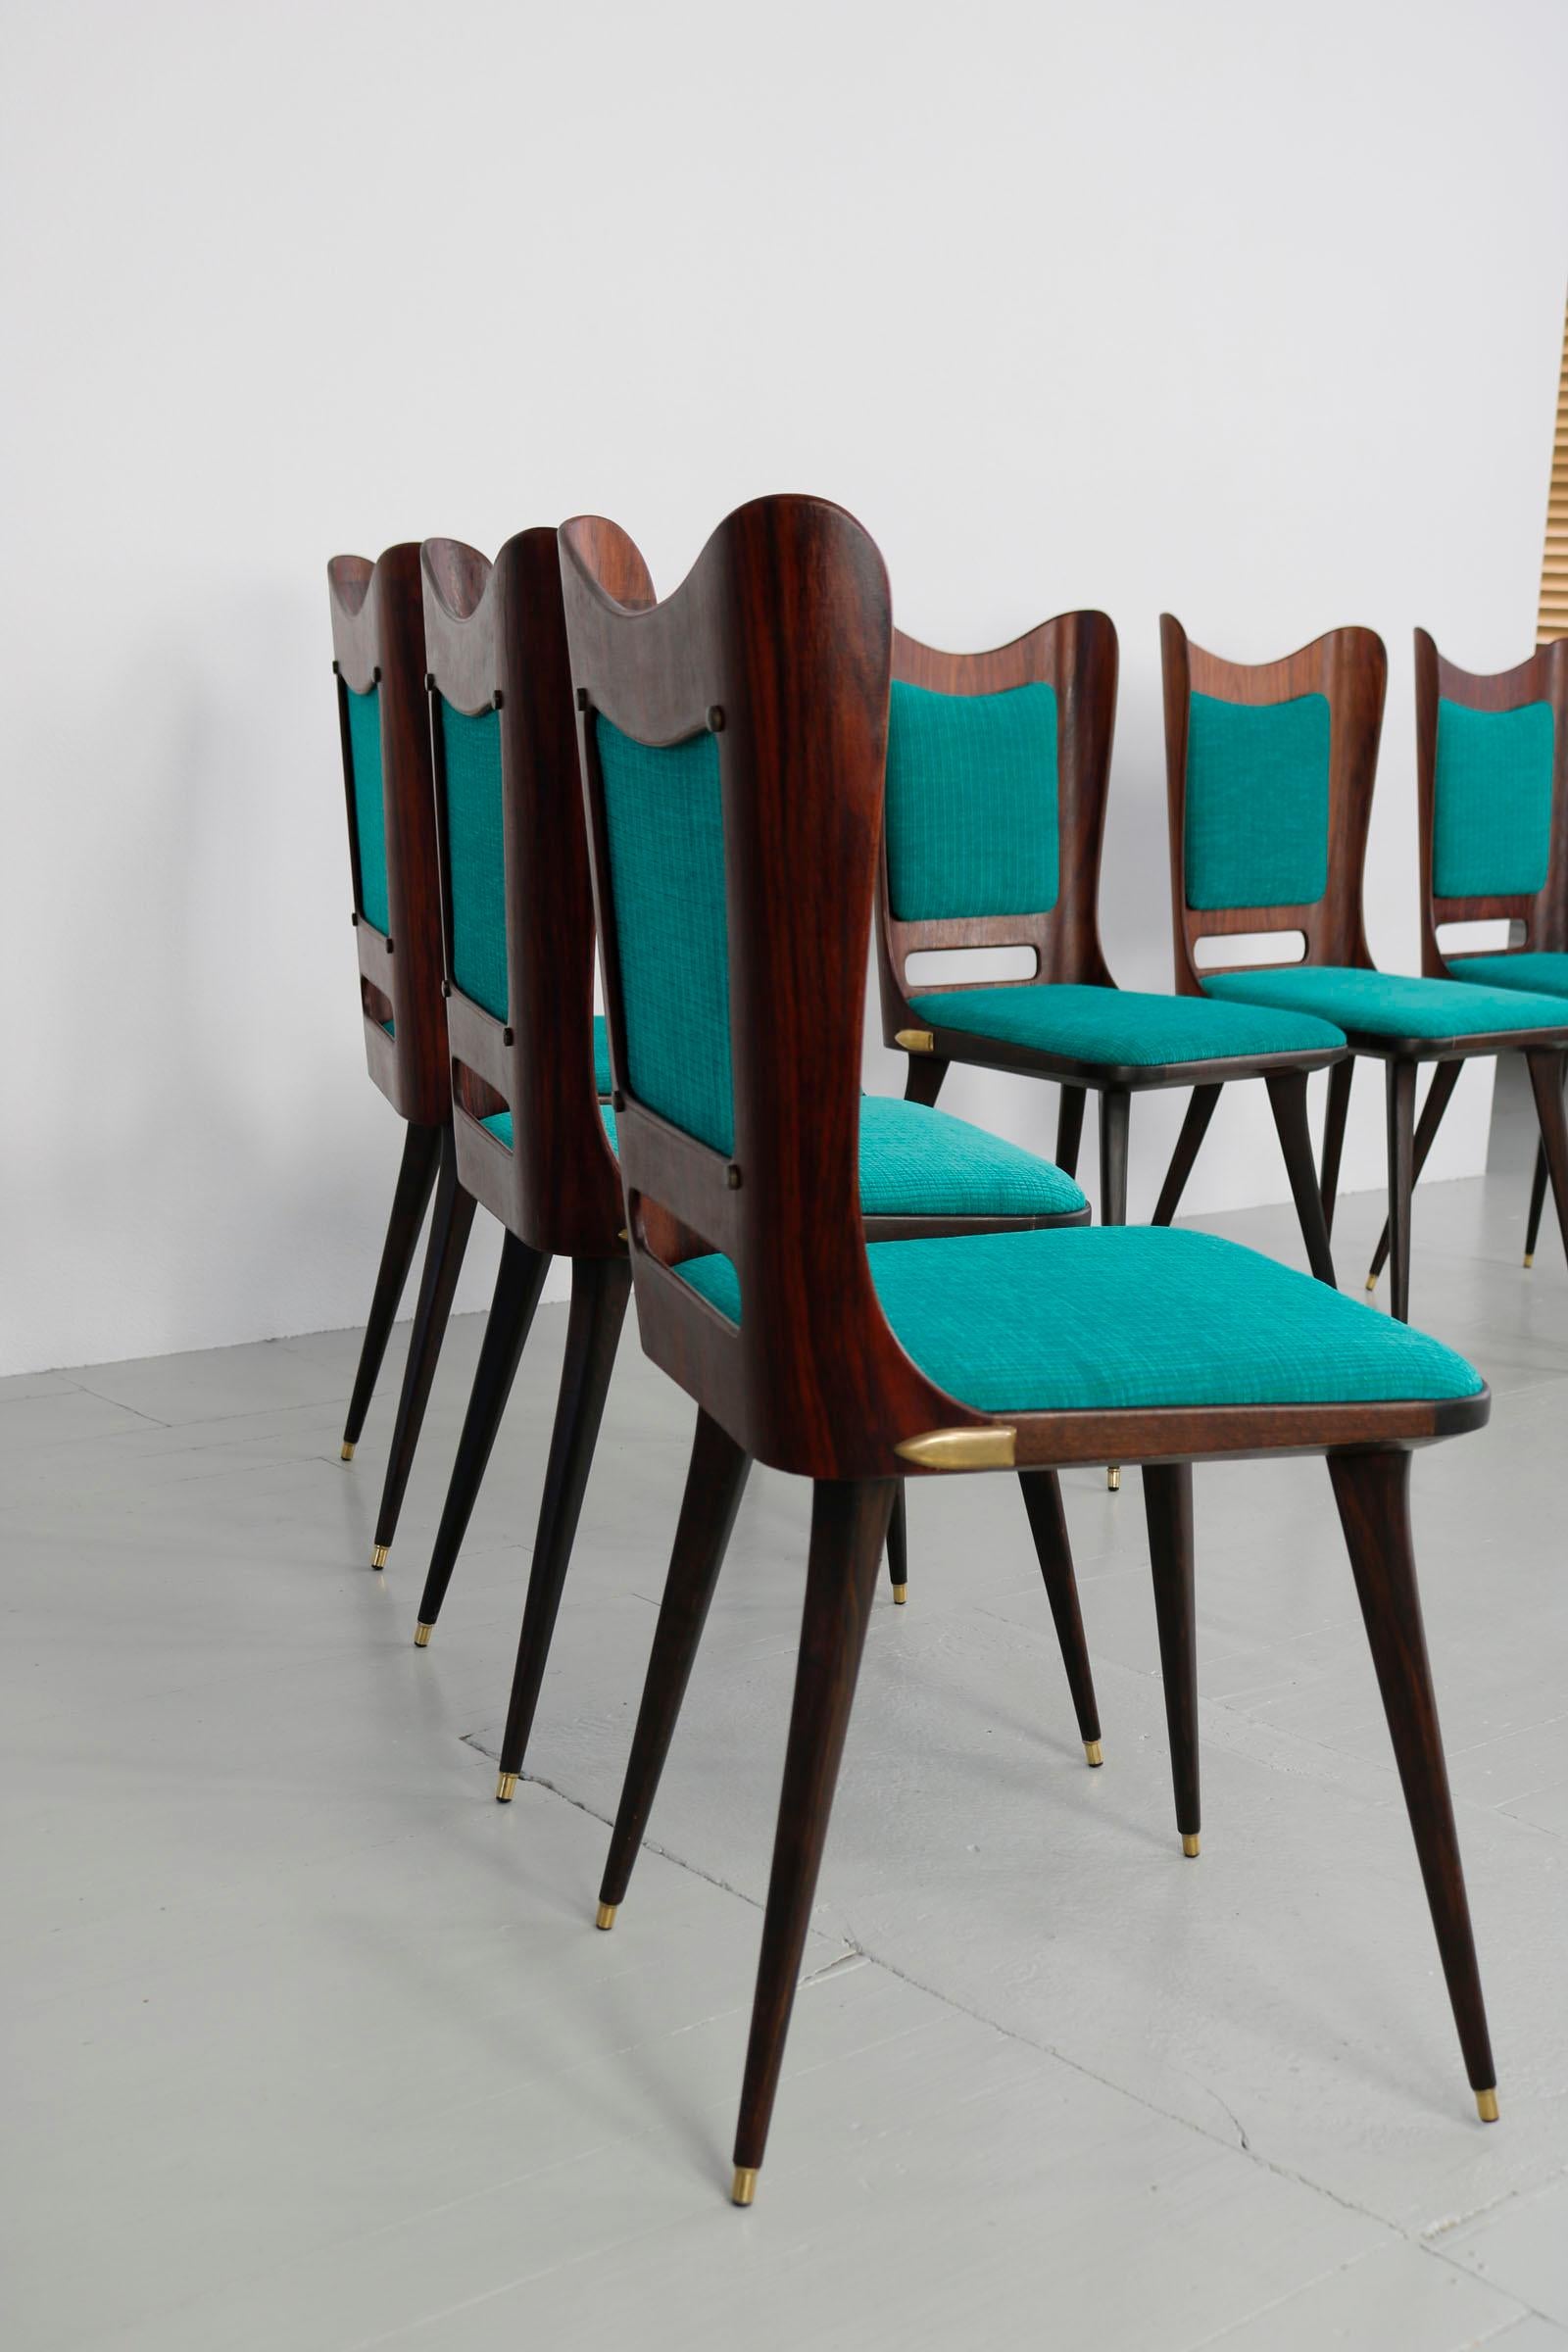 Set of Six Wooden Dining Chairs with Green Upholstery, 1950s For Sale 11